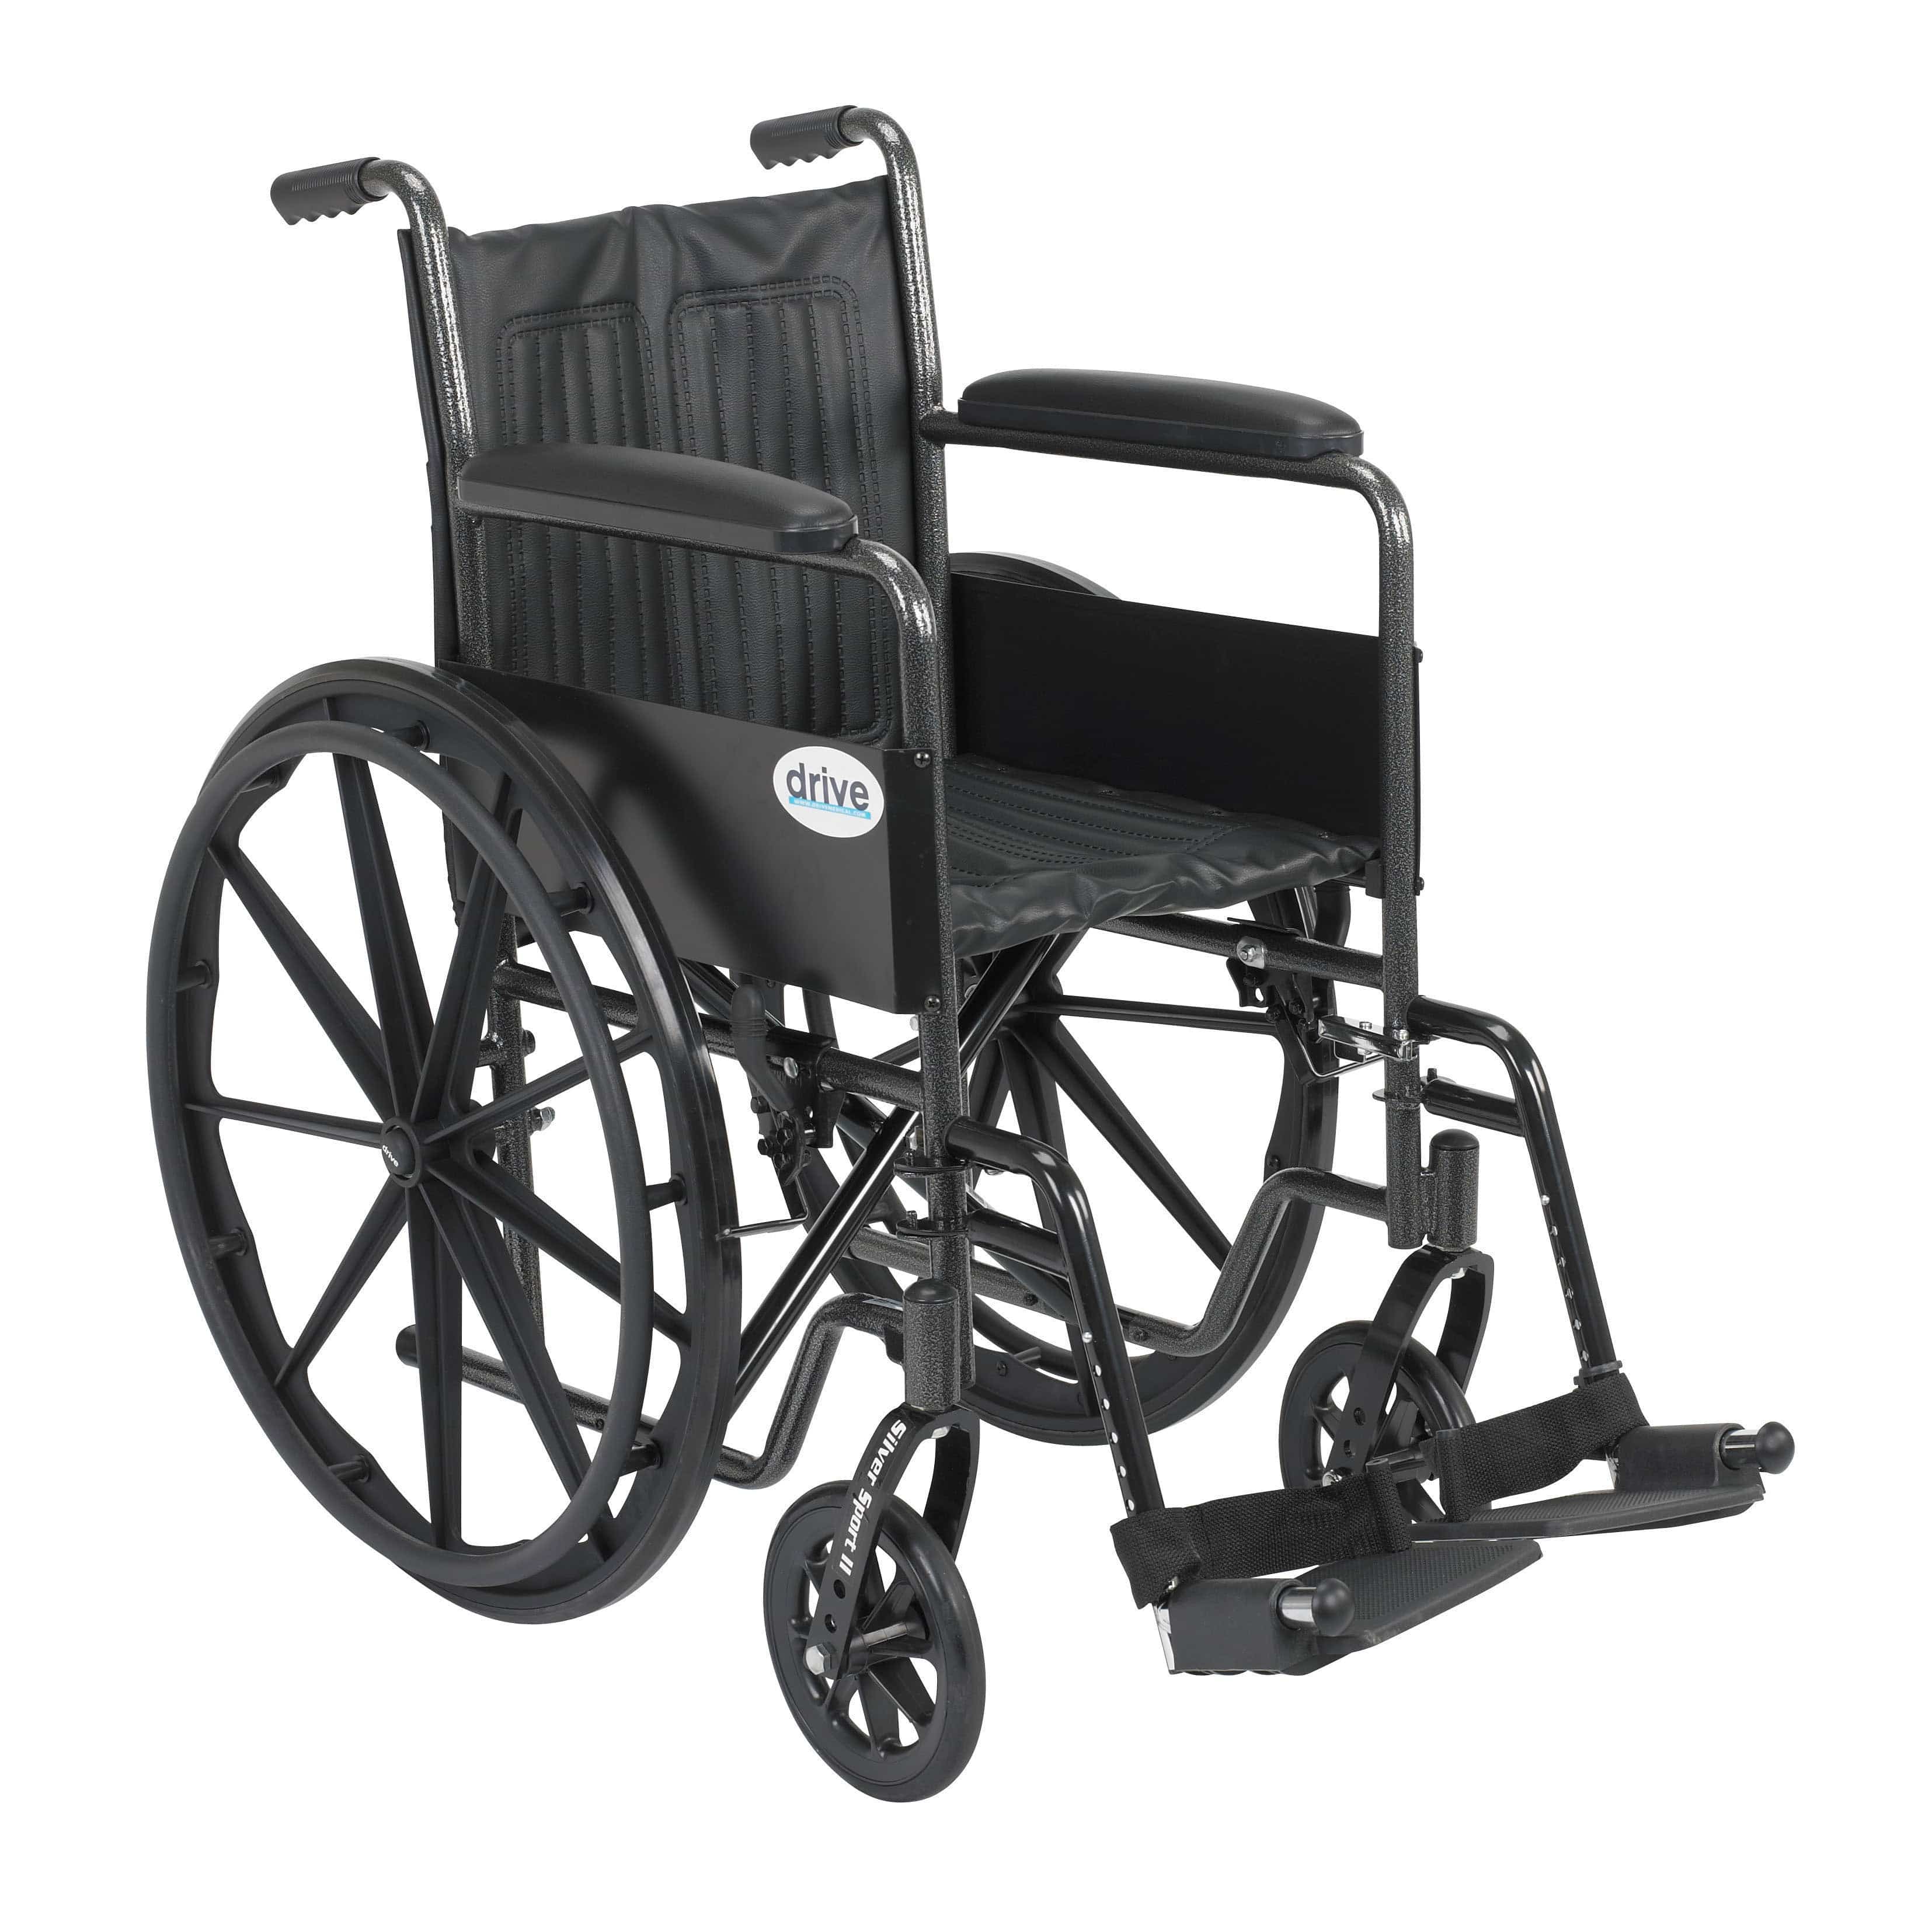 Drive Medical Wheelchairs/Standard Wheelchairs Non Removable Fixed Arms and Swing away Footrests / 18" Seat Drive Medical Silver Sport 2 Wheelchair